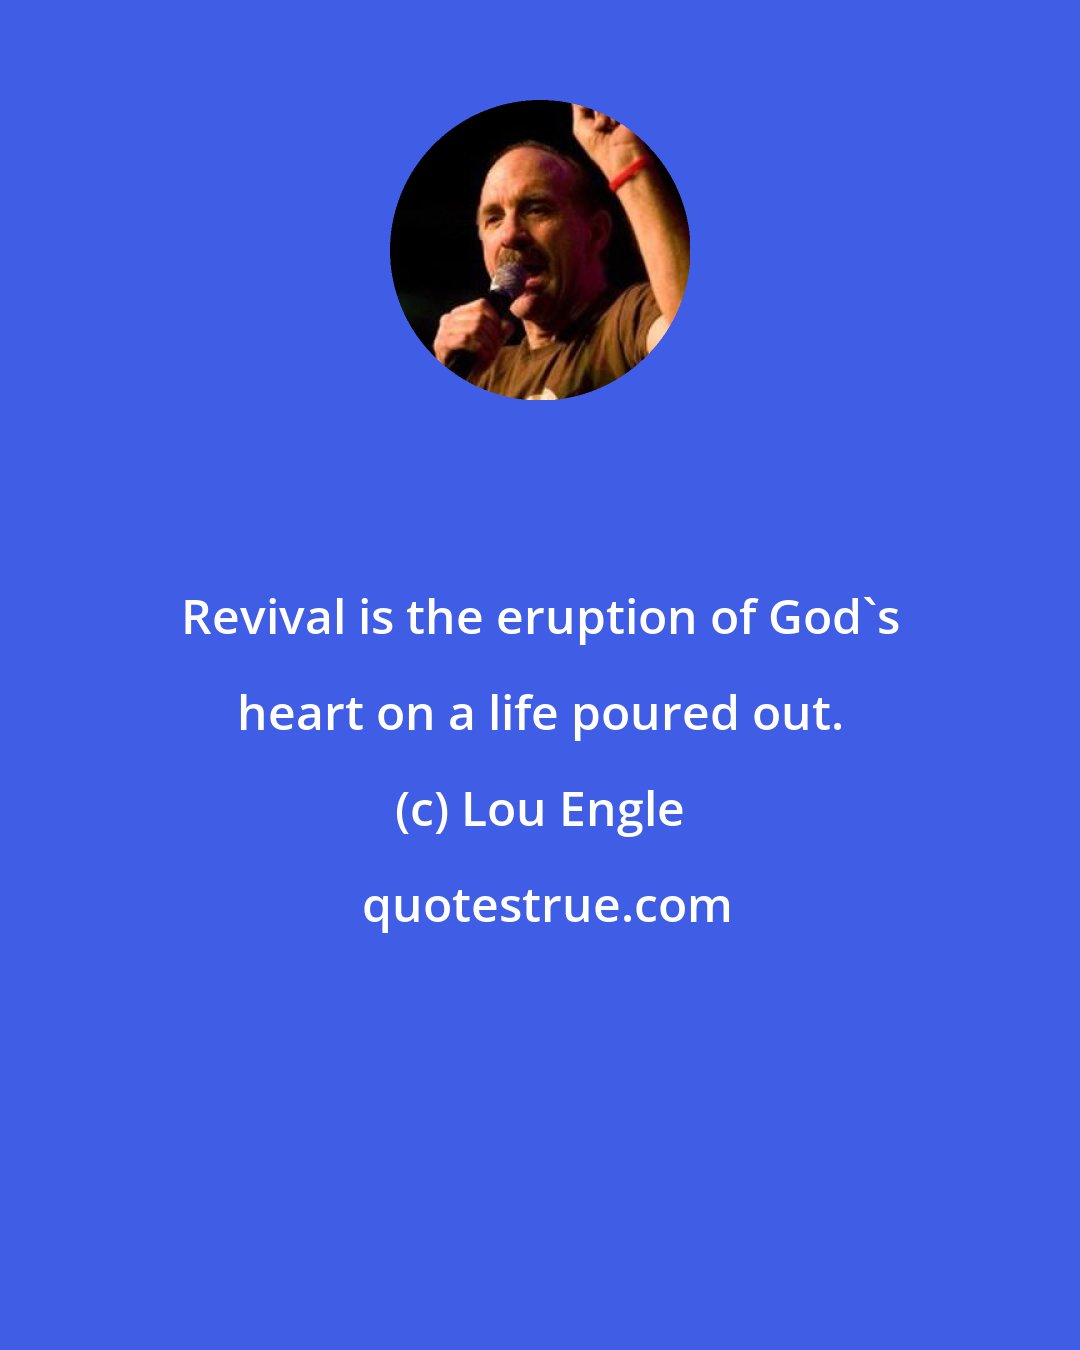 Lou Engle: Revival is the eruption of God's heart on a life poured out.